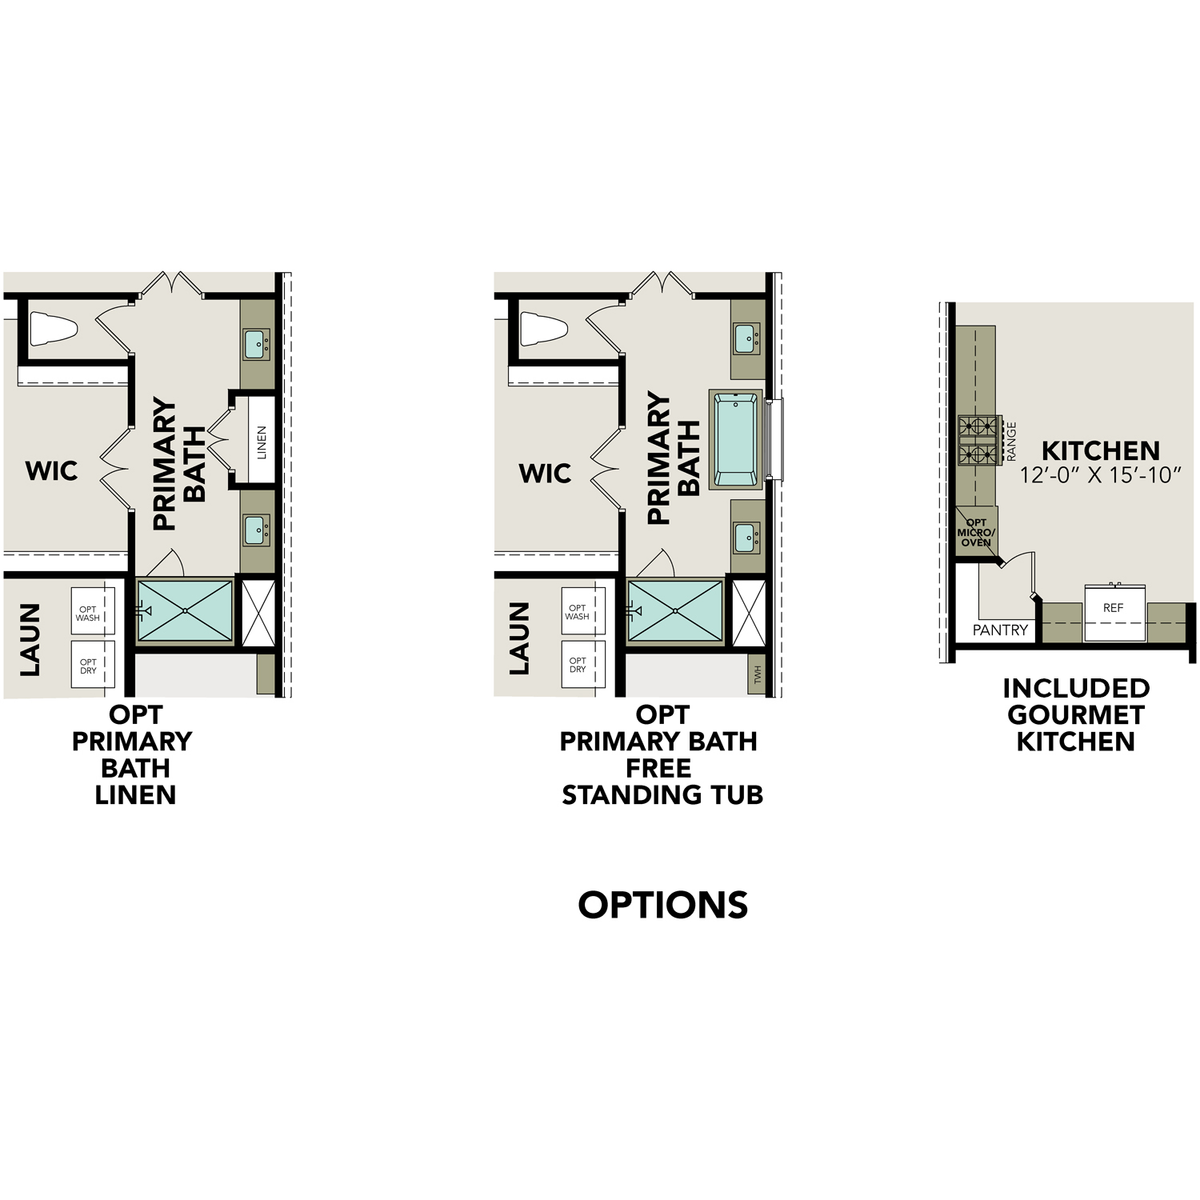 3 - The Jennings G buildable floor plan layout in Davidson Homes' The Reserve at Potranco Oaks community.